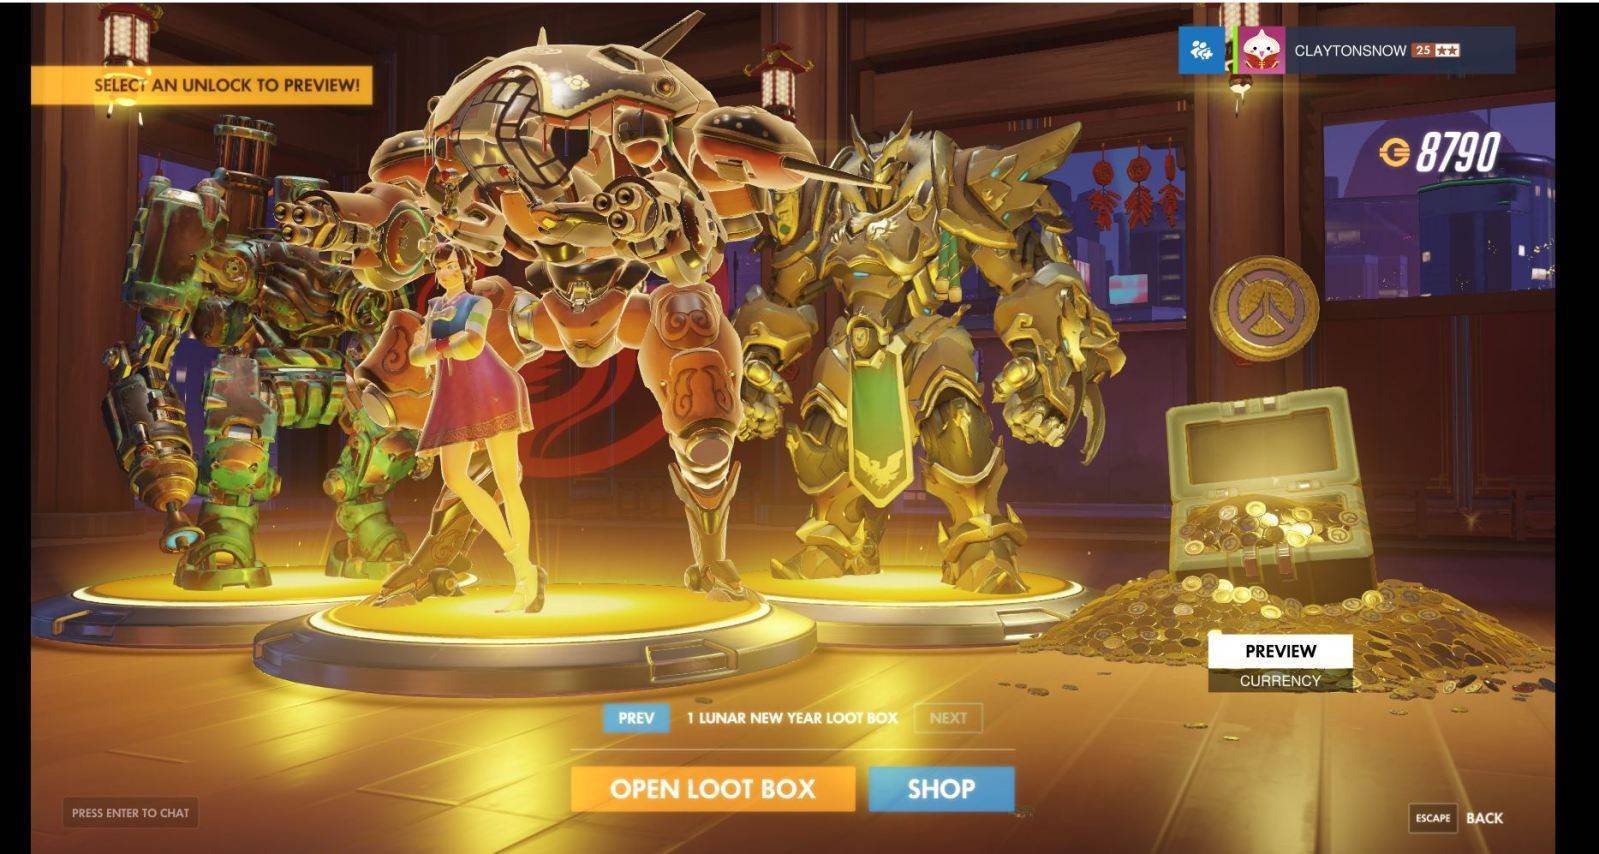 Overwatch Golden Box (PC/PS4/Xbox) (PC) Key cheap - Price of $11.69